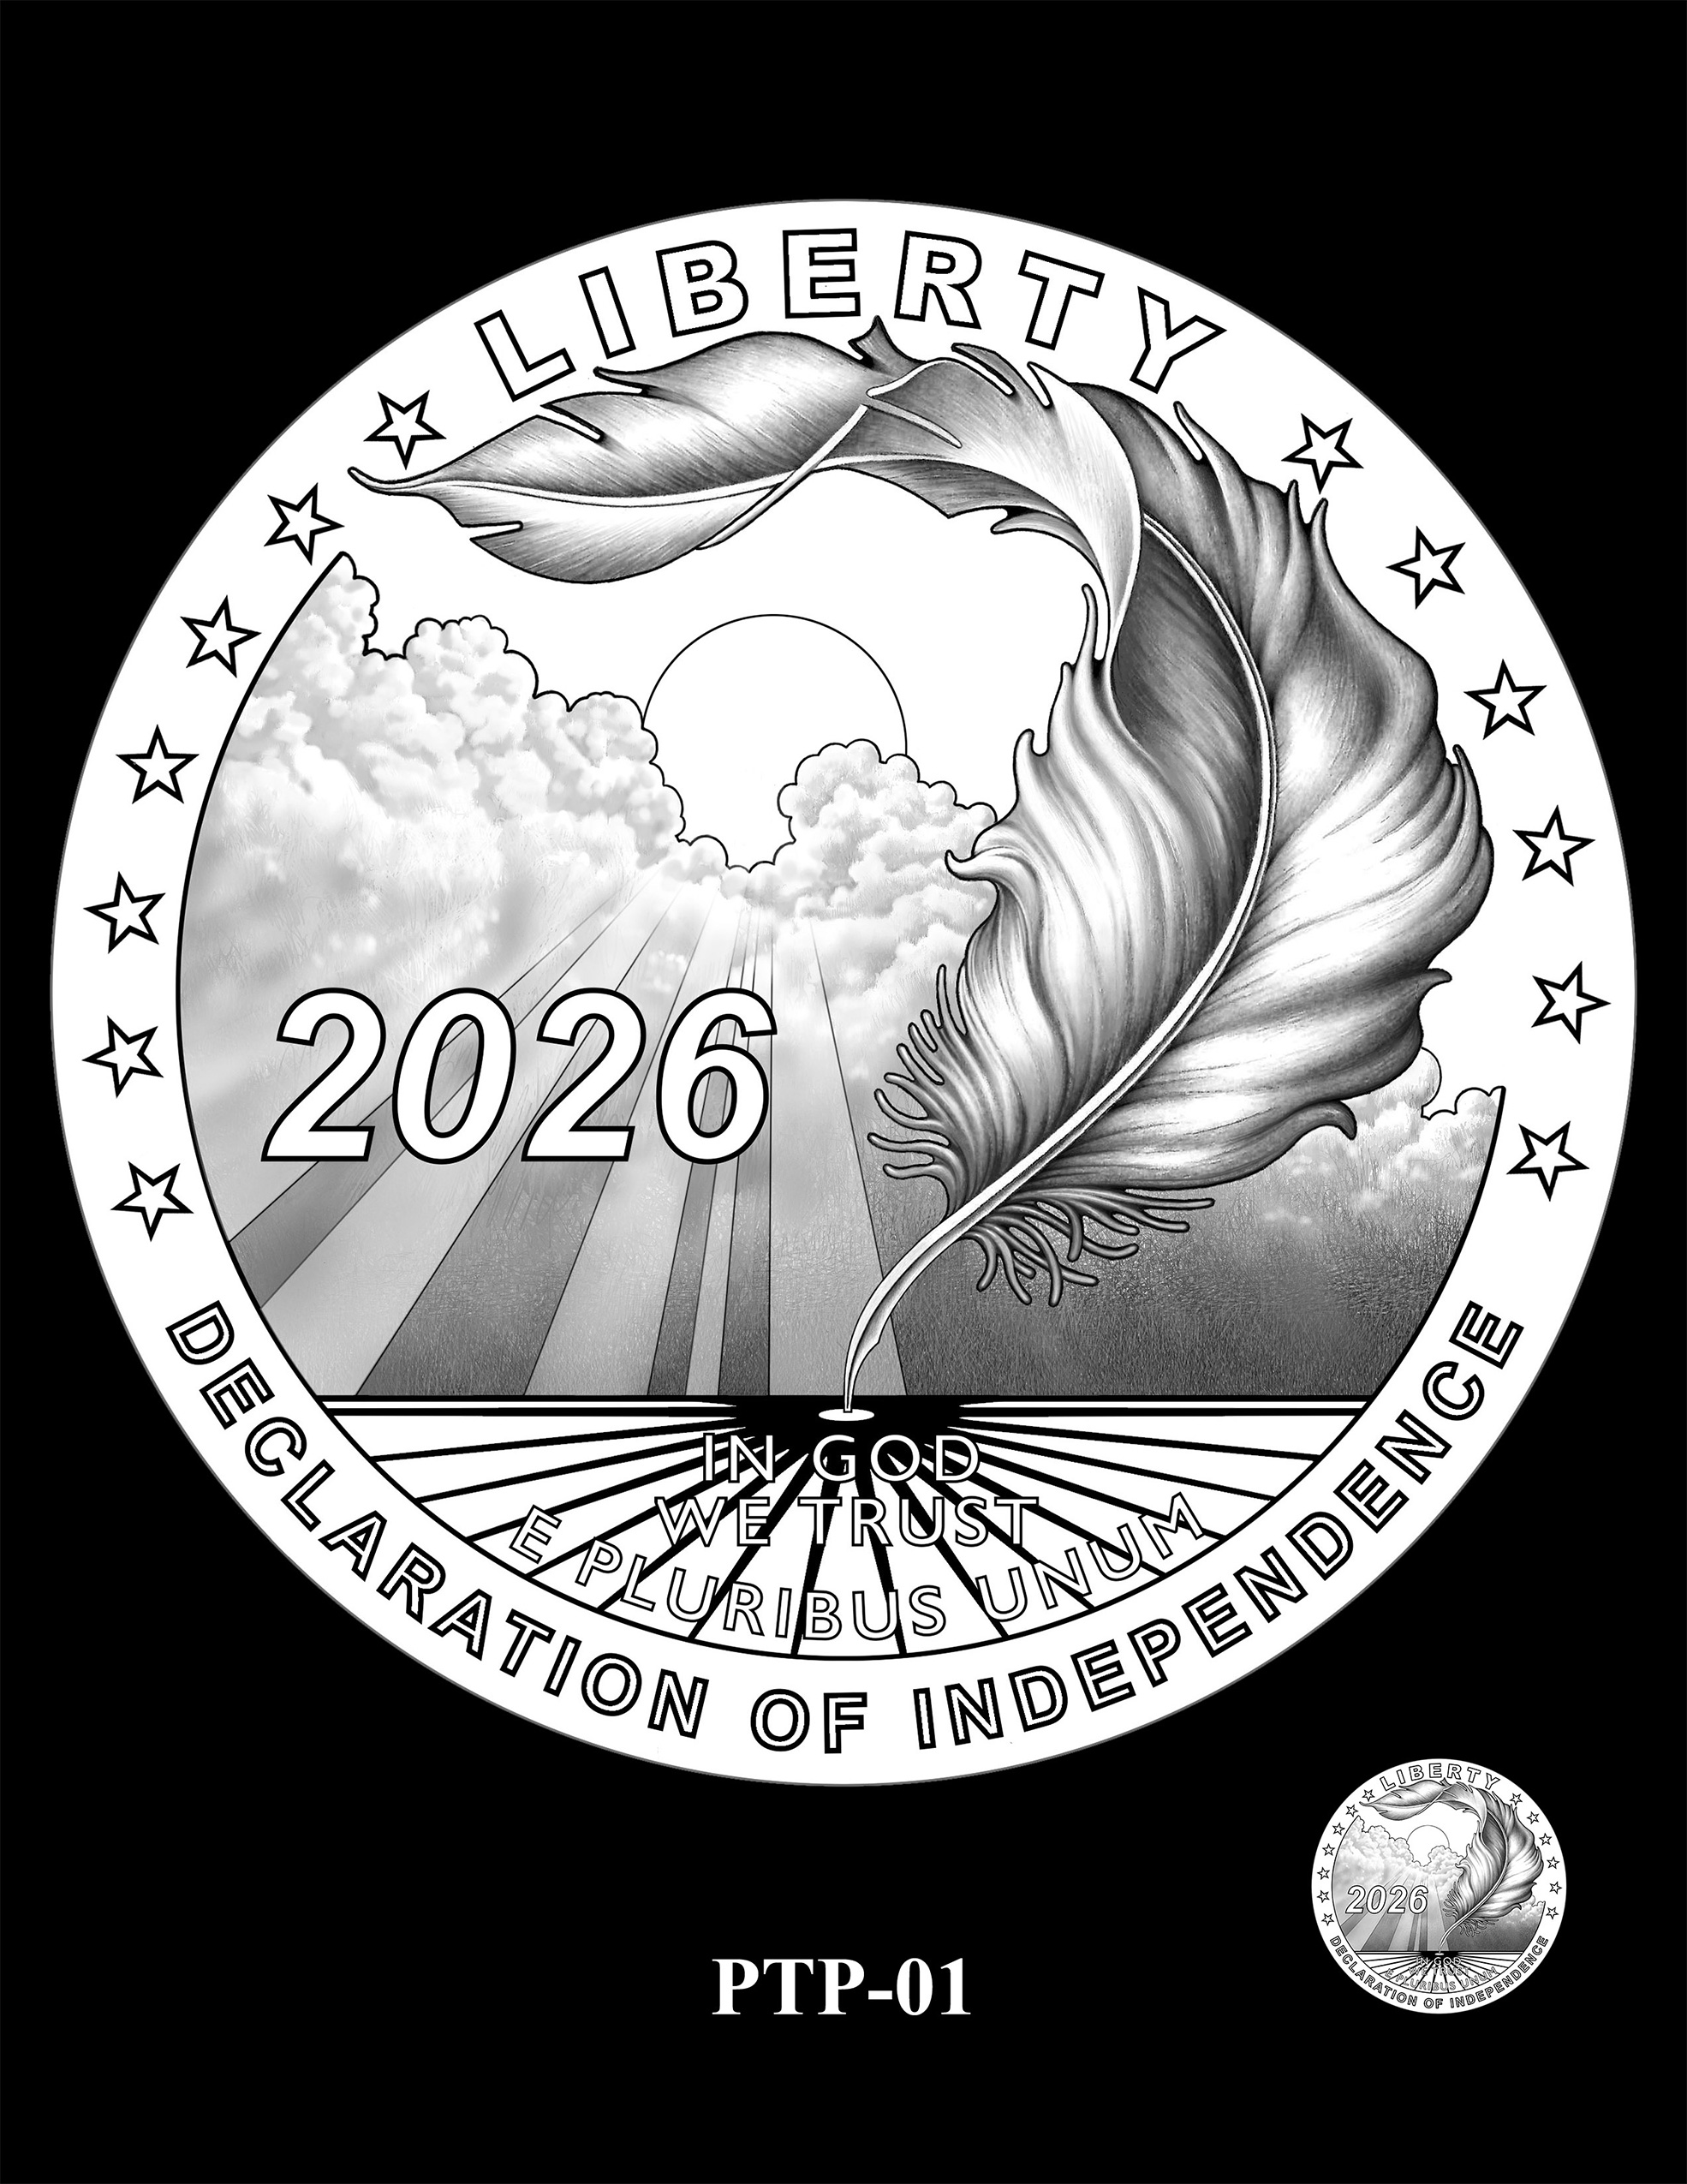 PTP-01 -- 2026 Platinum Proof Coin - Declaration of Independence